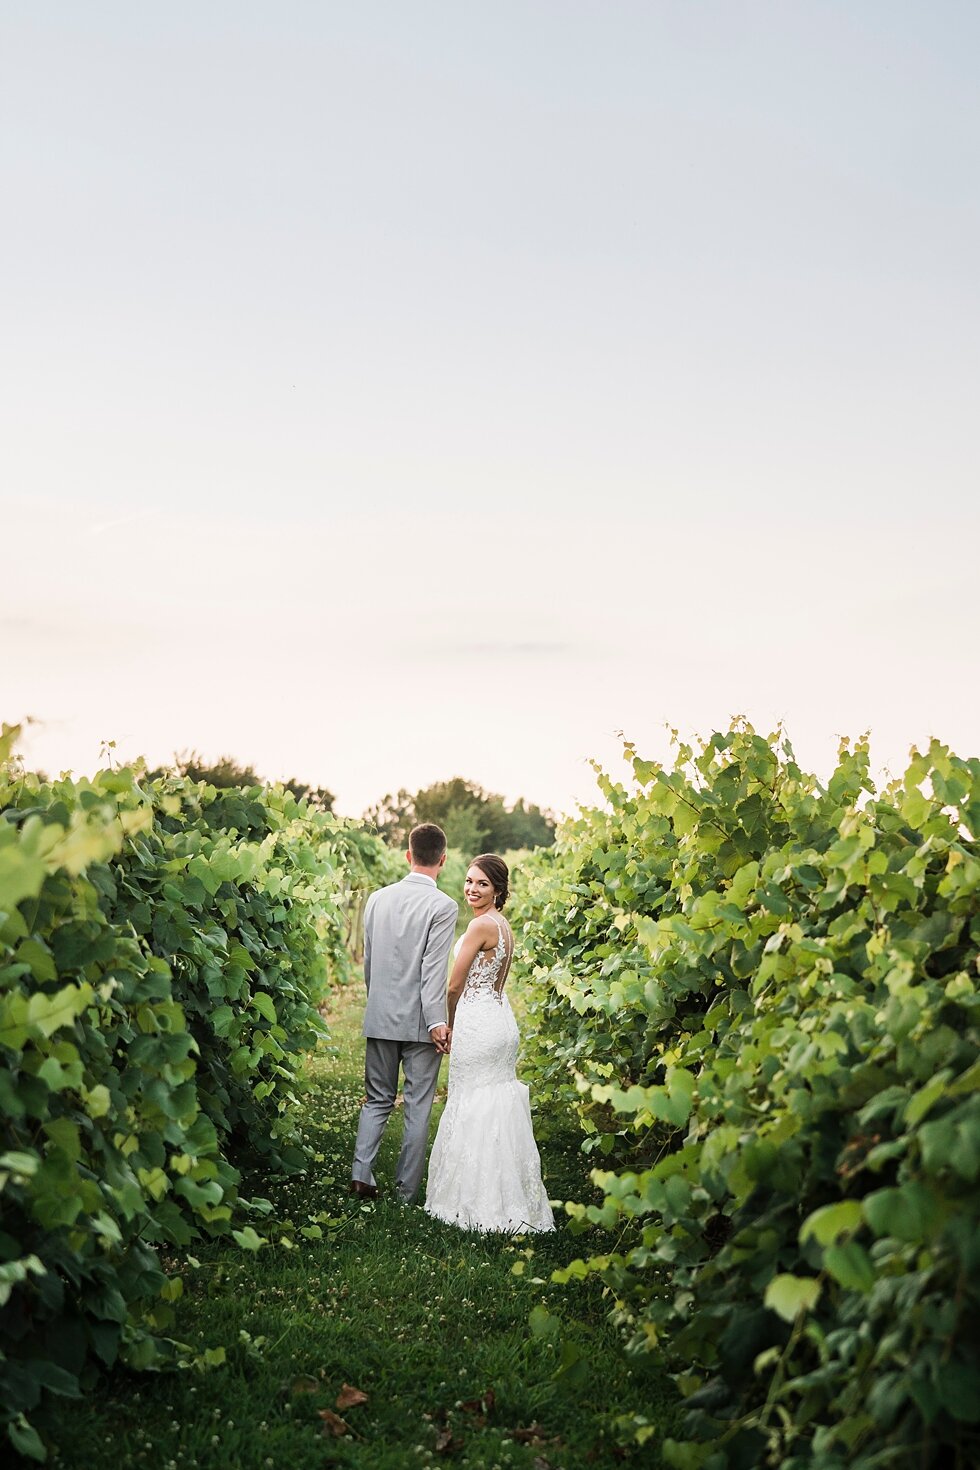  Bride and groom walking together in the Huber Winery orchard after their wedding ceremony. wedding ceremony details stunning photography married midwest louisville kentucky #weddingphoto #love #justmarried #midwestphotographer #kywedding #louisville